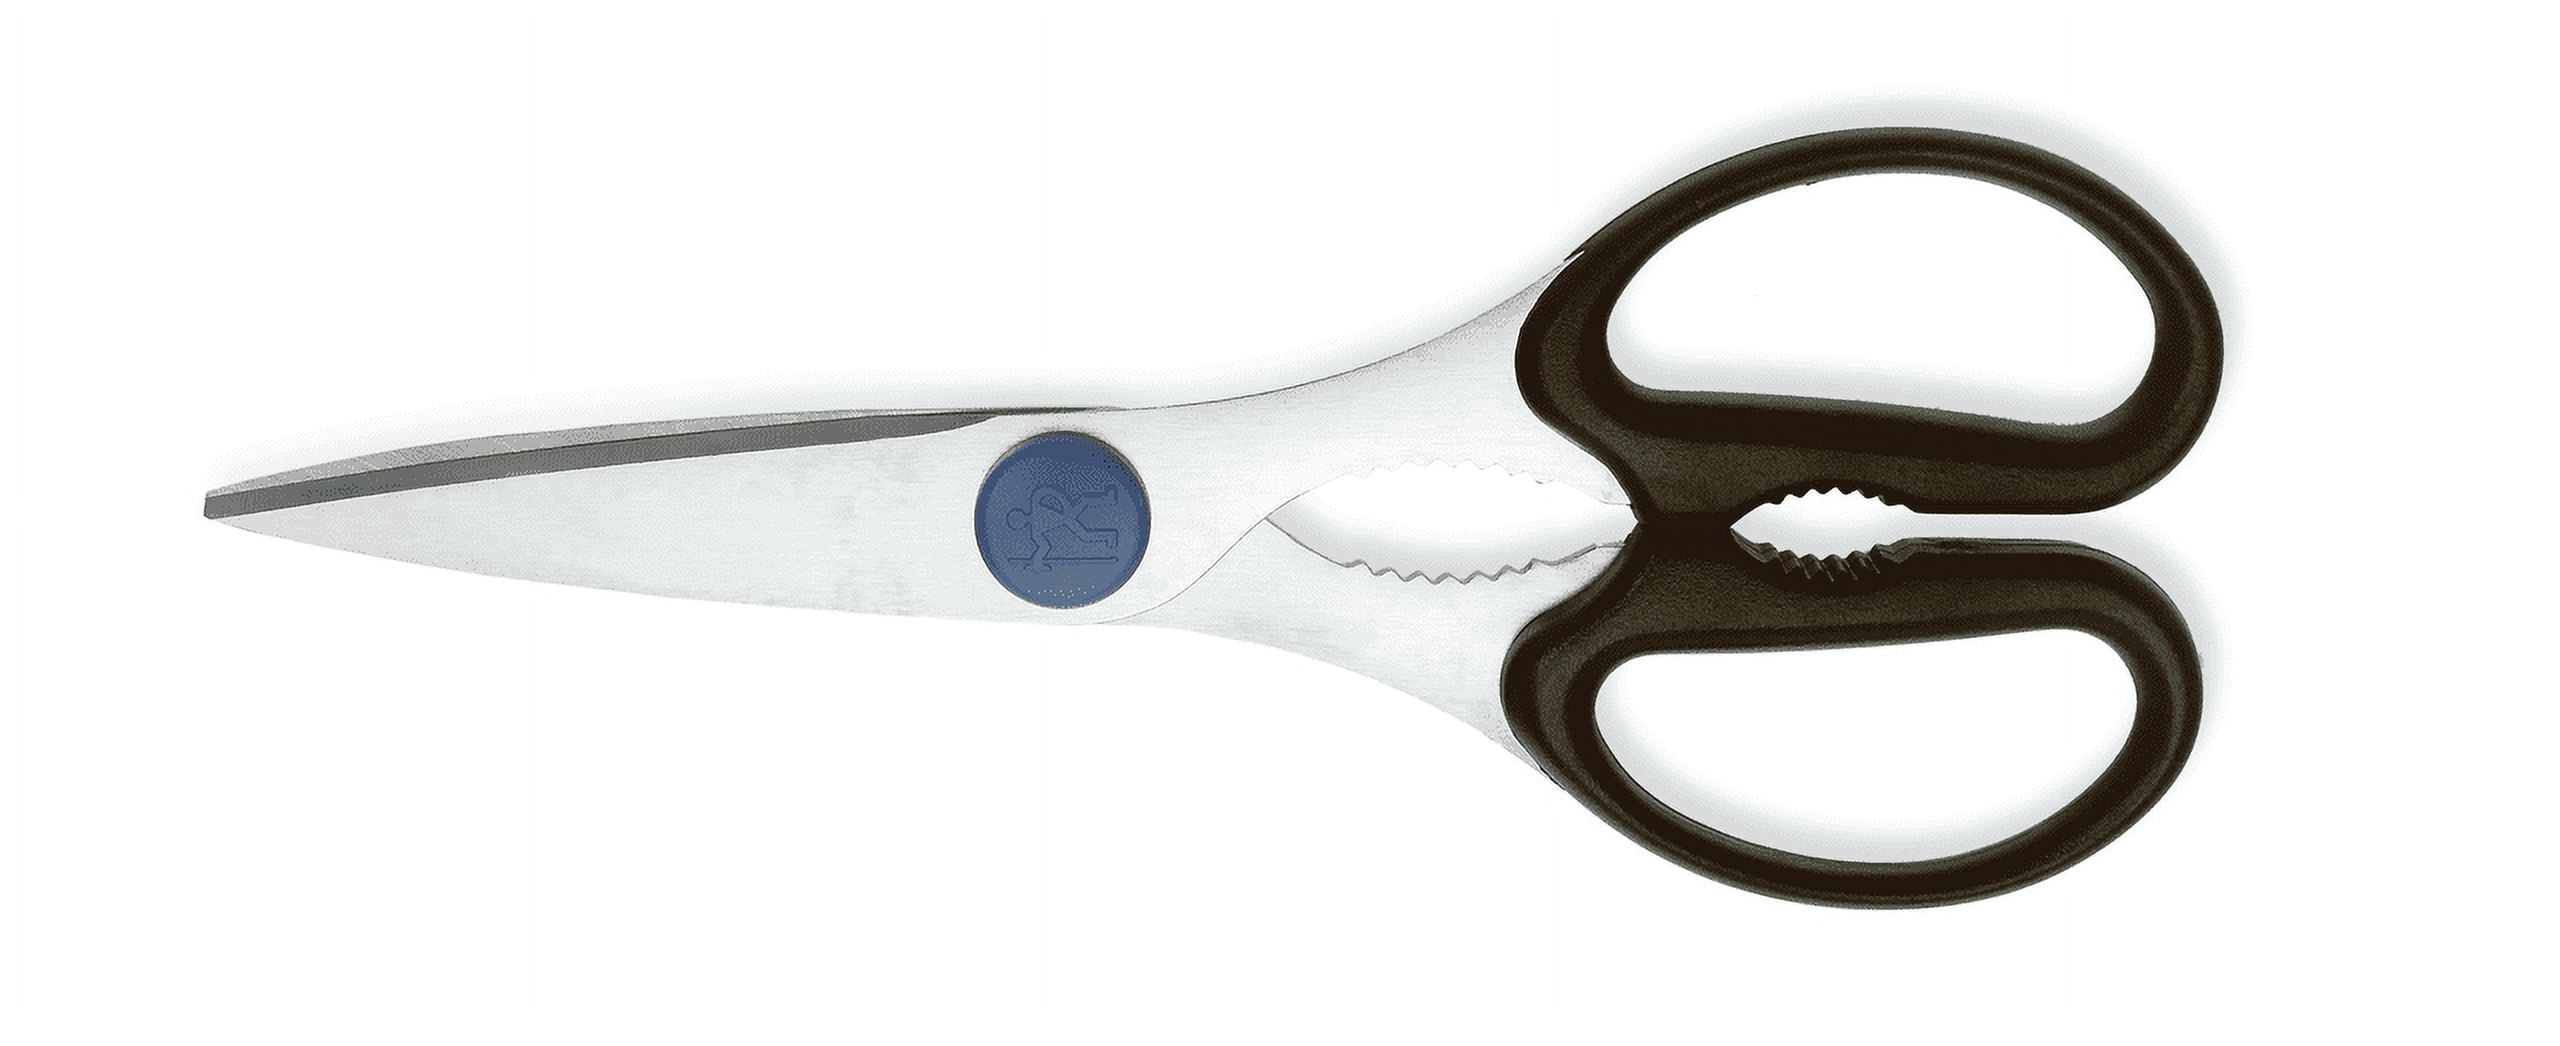 Poultry Shears Heavy Duty Professional Kitchen Scissors Stainless Steel,  Easily Snipping Through Skin and Crunching Bones, Locking Hinge to Take  Apart